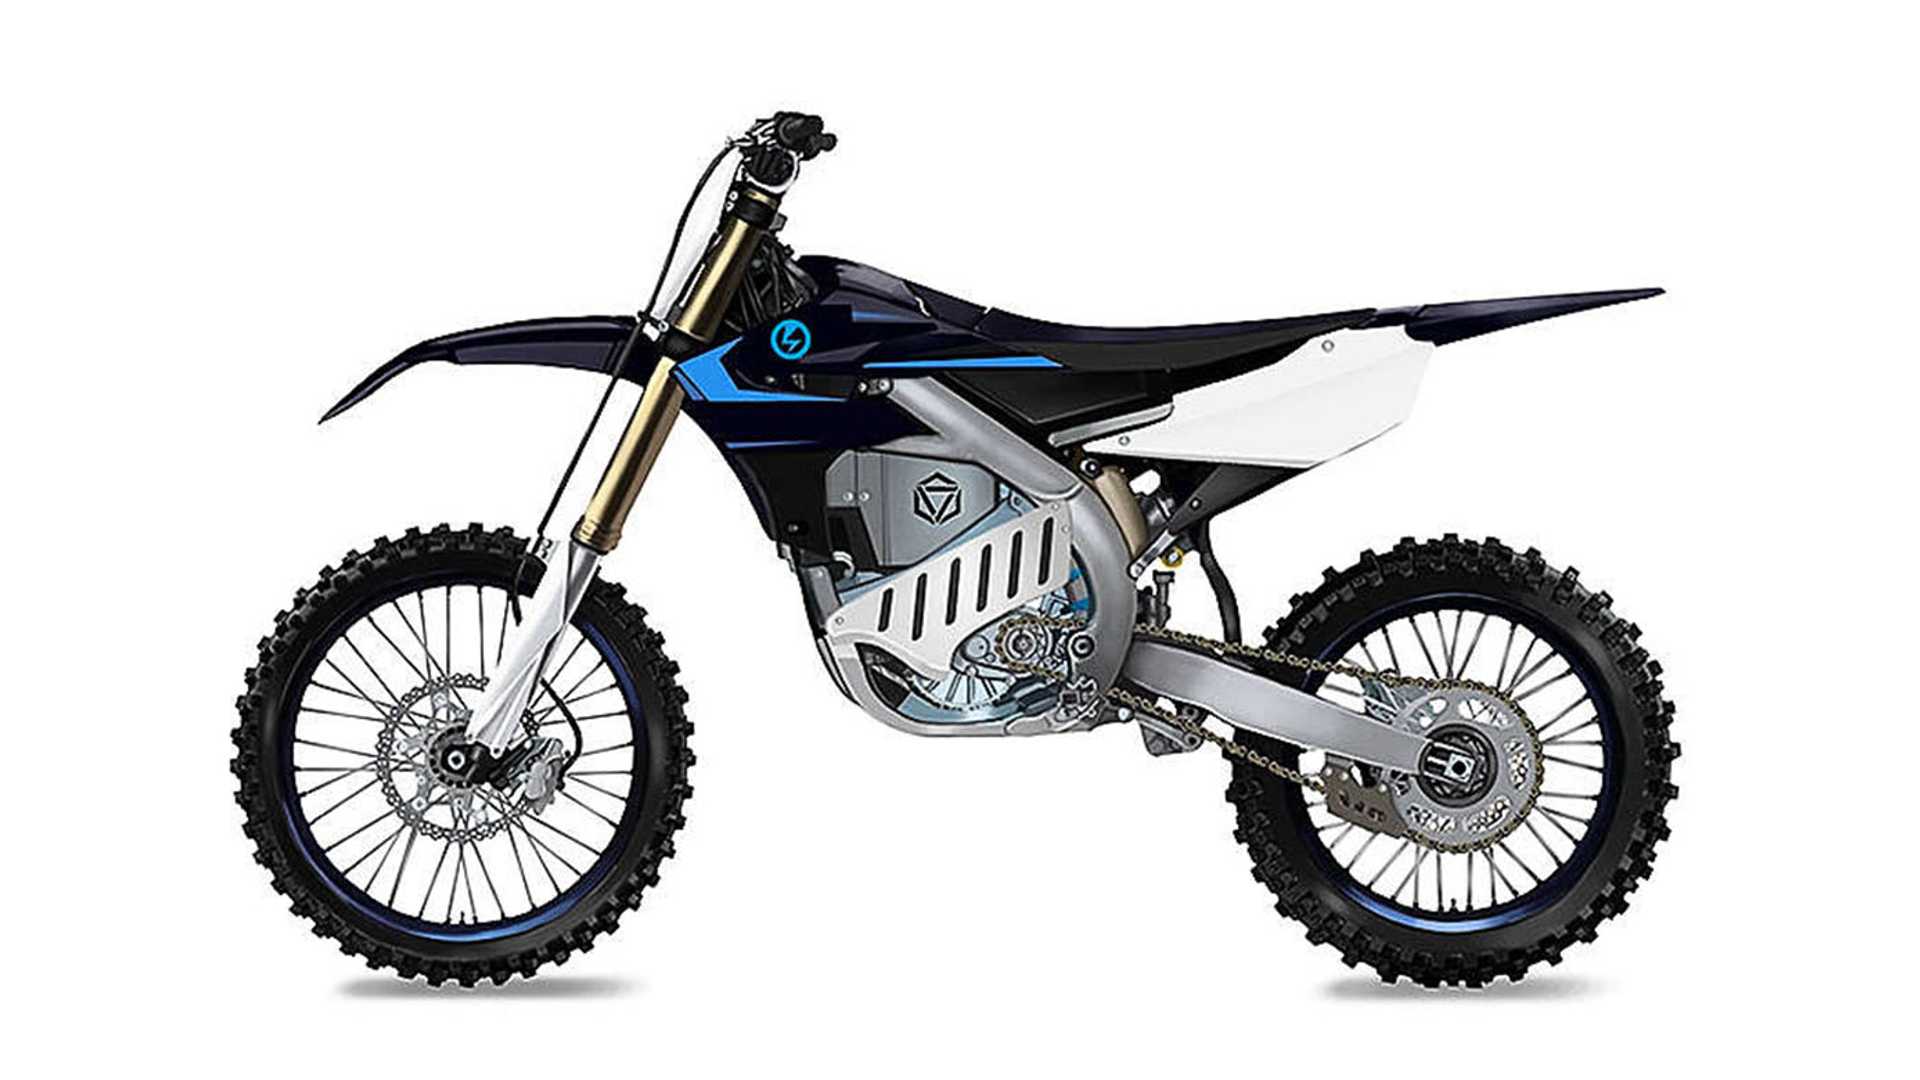 Yamaha cross bike with electric drive
- also in the App MOTORCYCLE NEWS